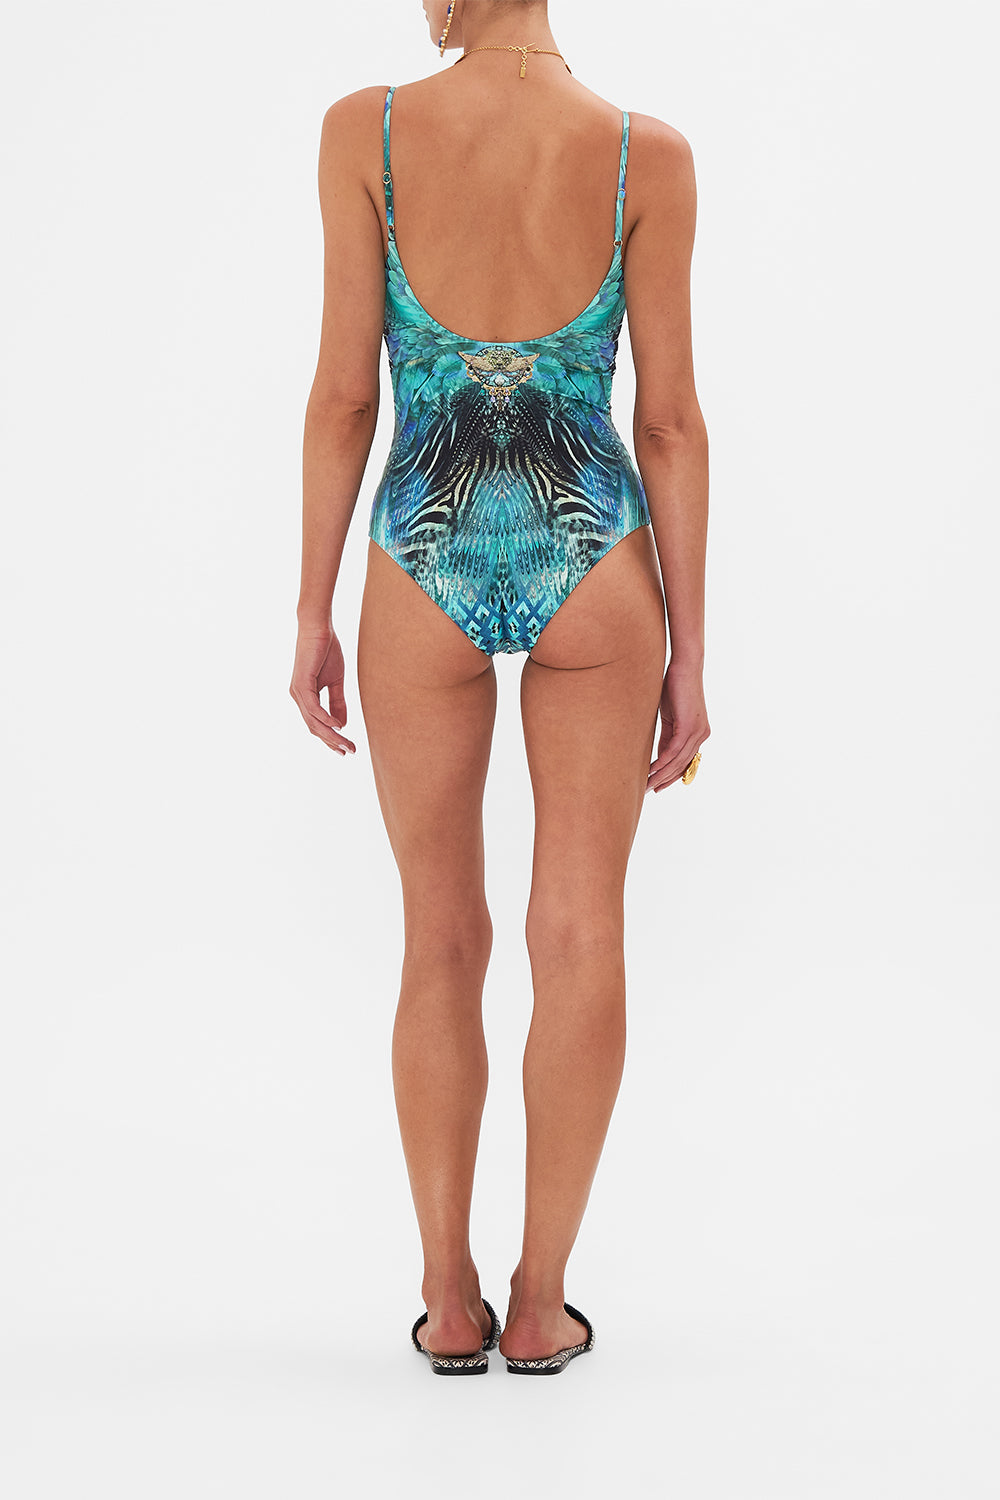 Back view of model wearing CAMILLA designer one piece swimsuit in Azure Allure